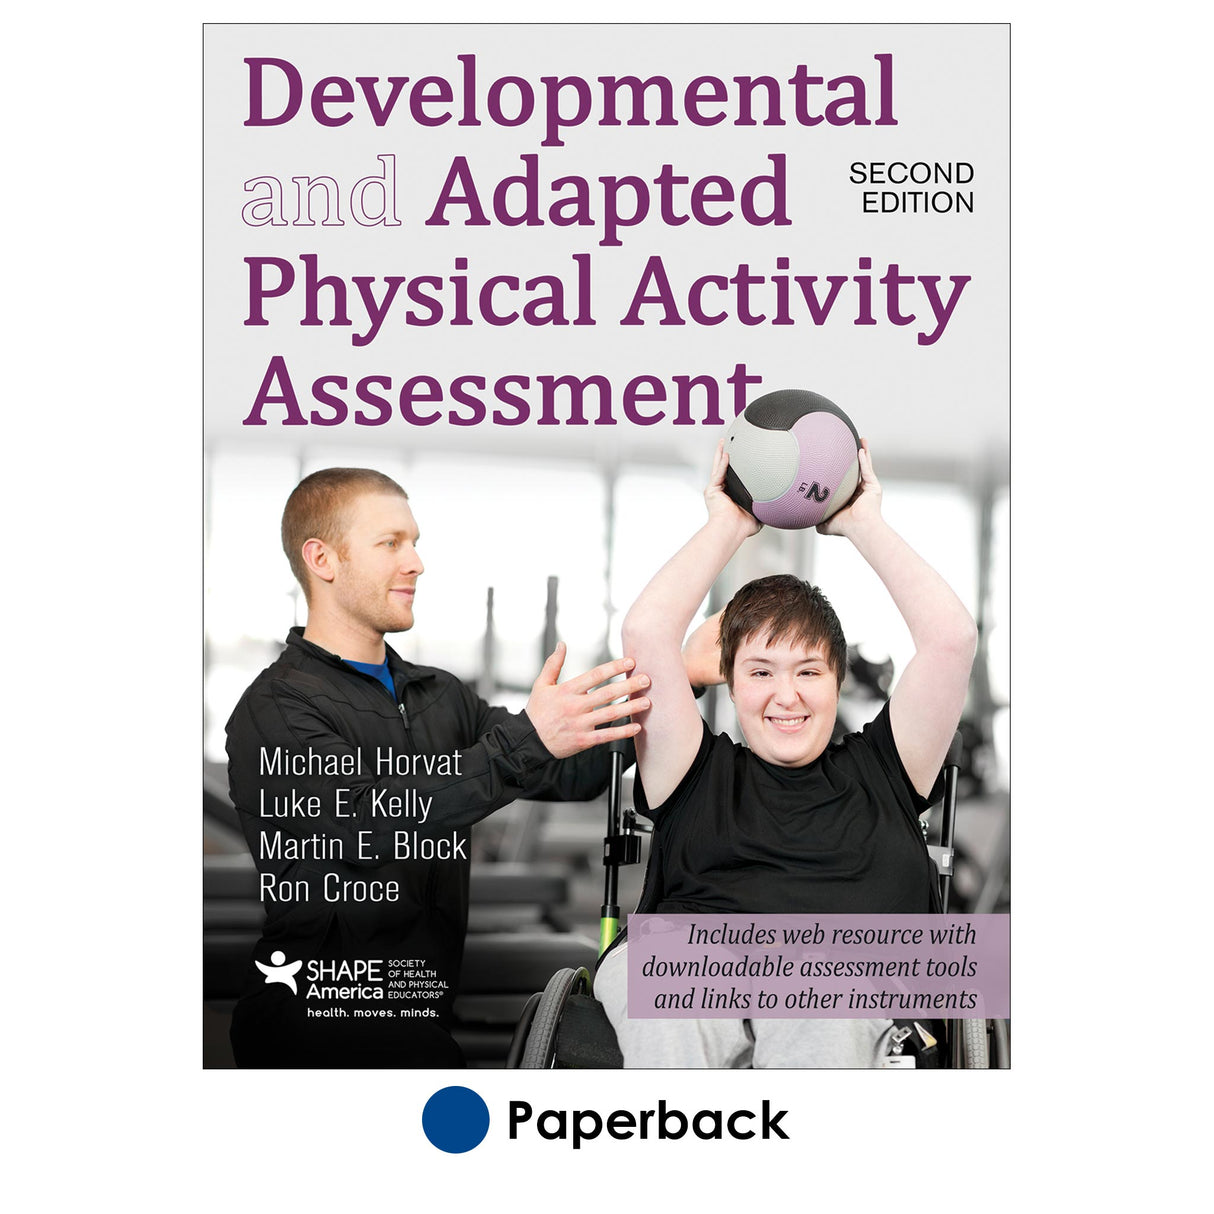 Developmental and Adapted Physical Activity Assessment 2nd Edition With Web Resource